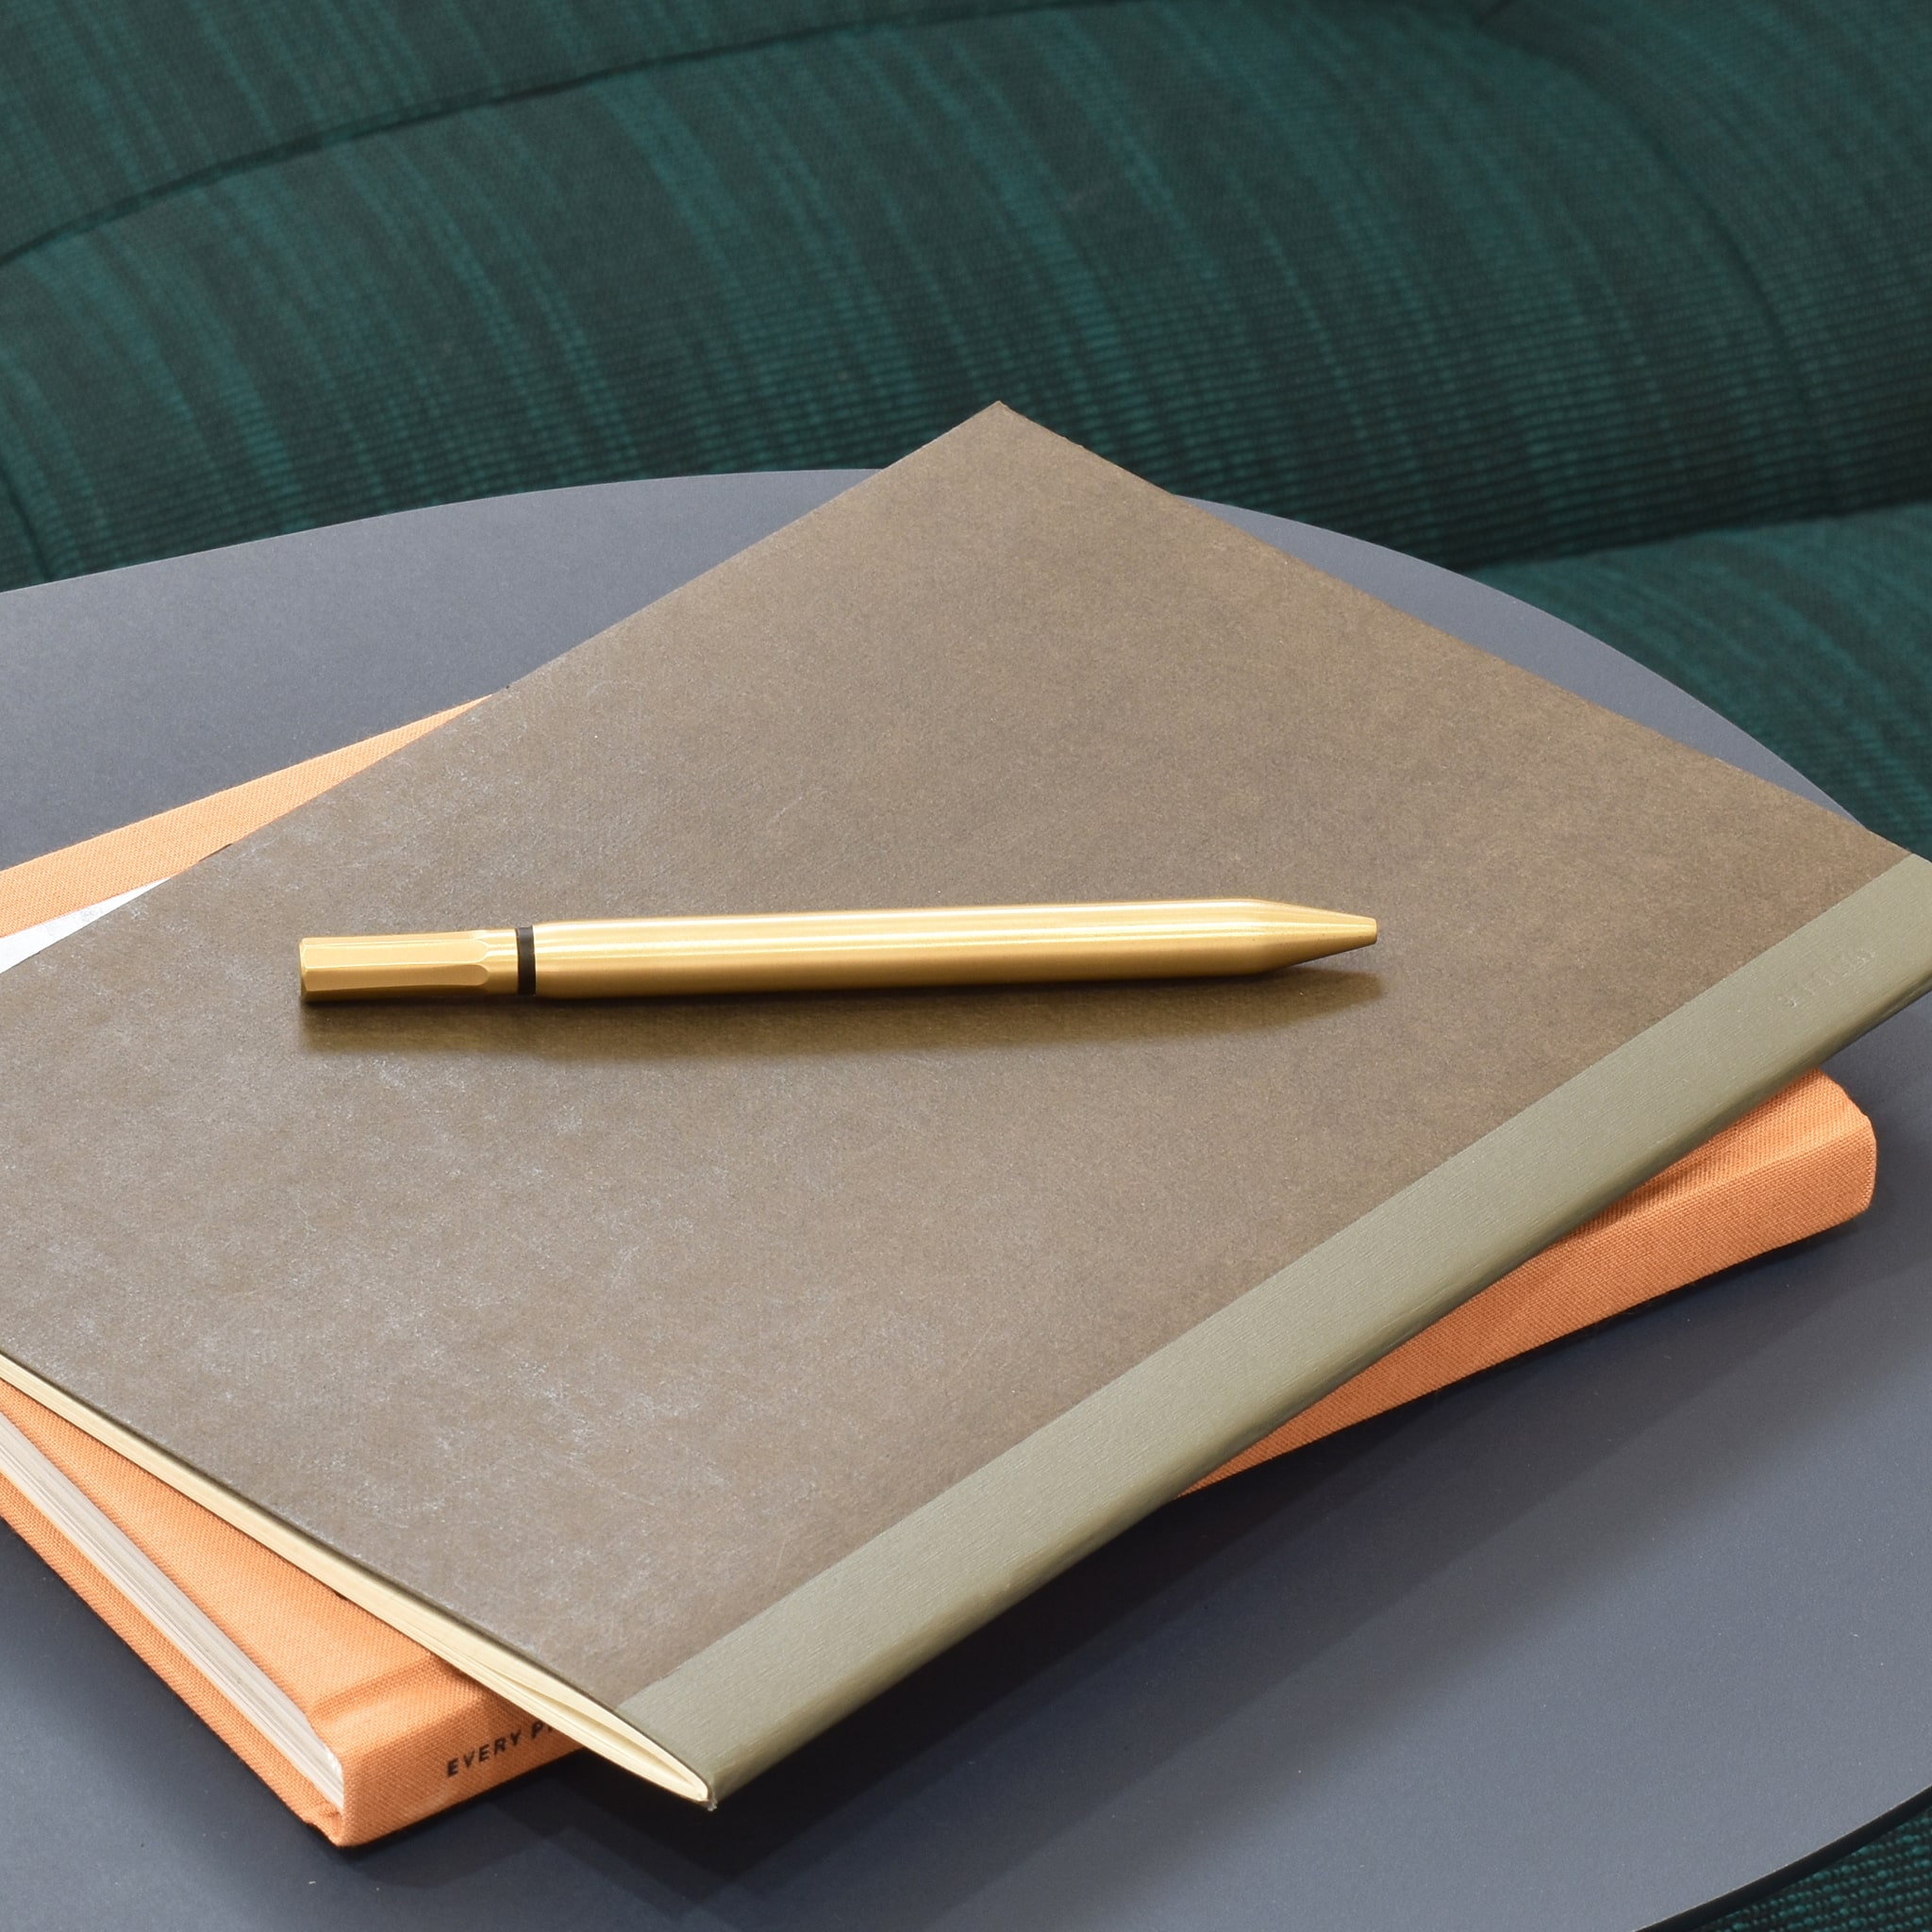 A set of notebooks and a pen